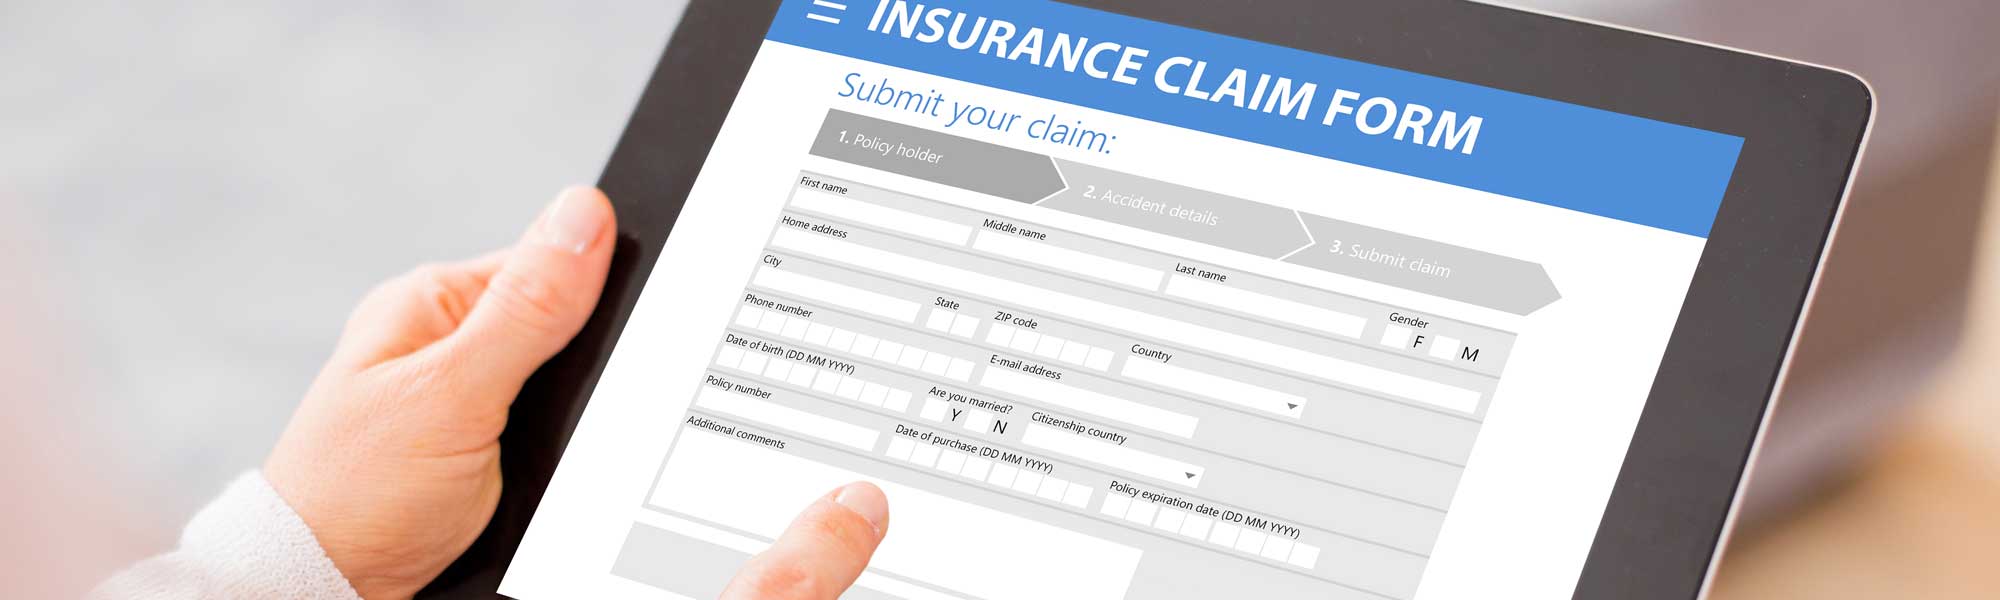 Insurance clain form on a tablet